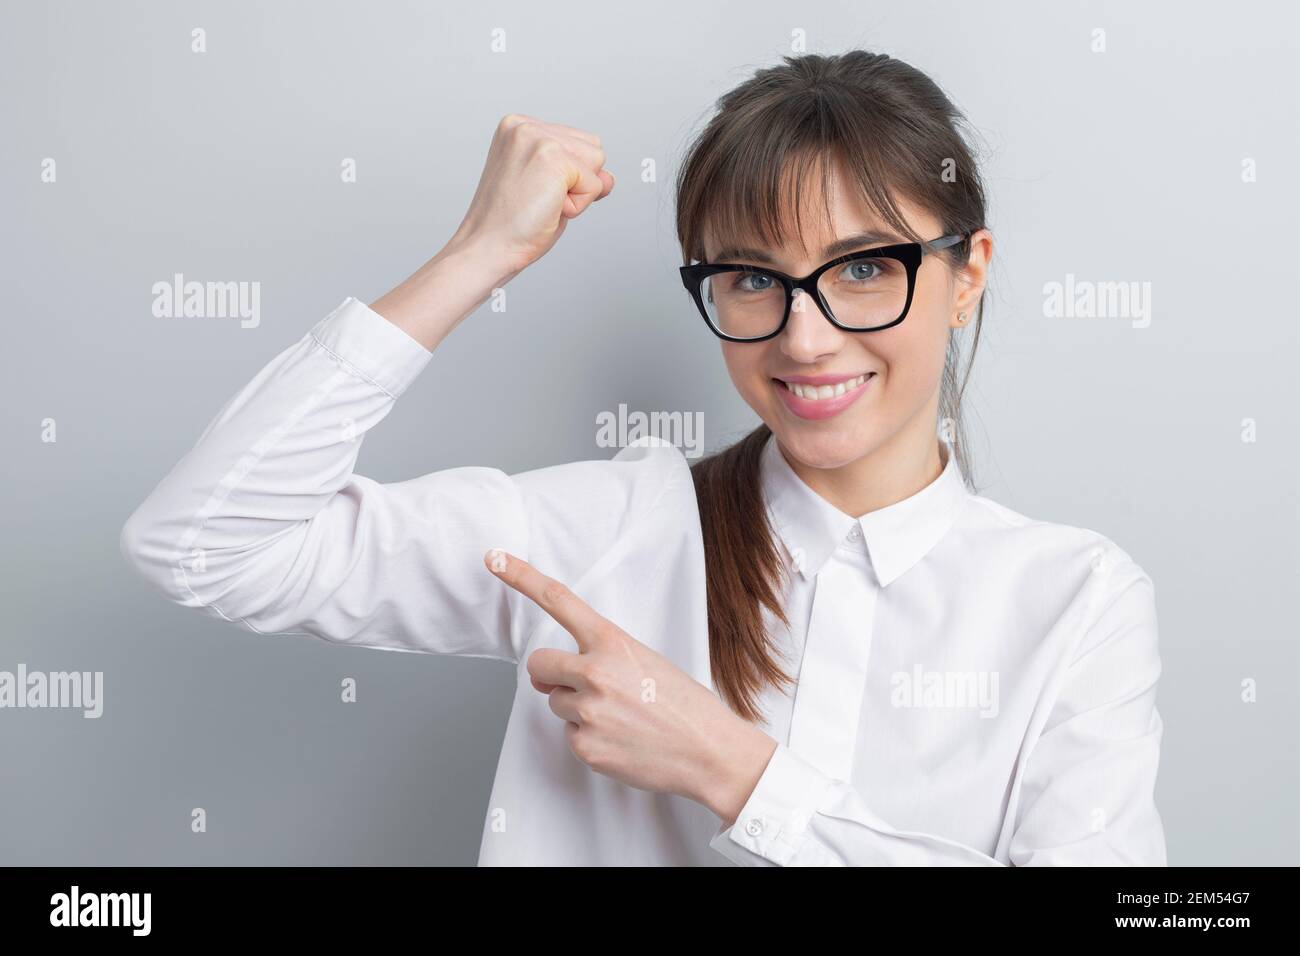 Portrait of a strong business woman wearing glasses. Stock Photo